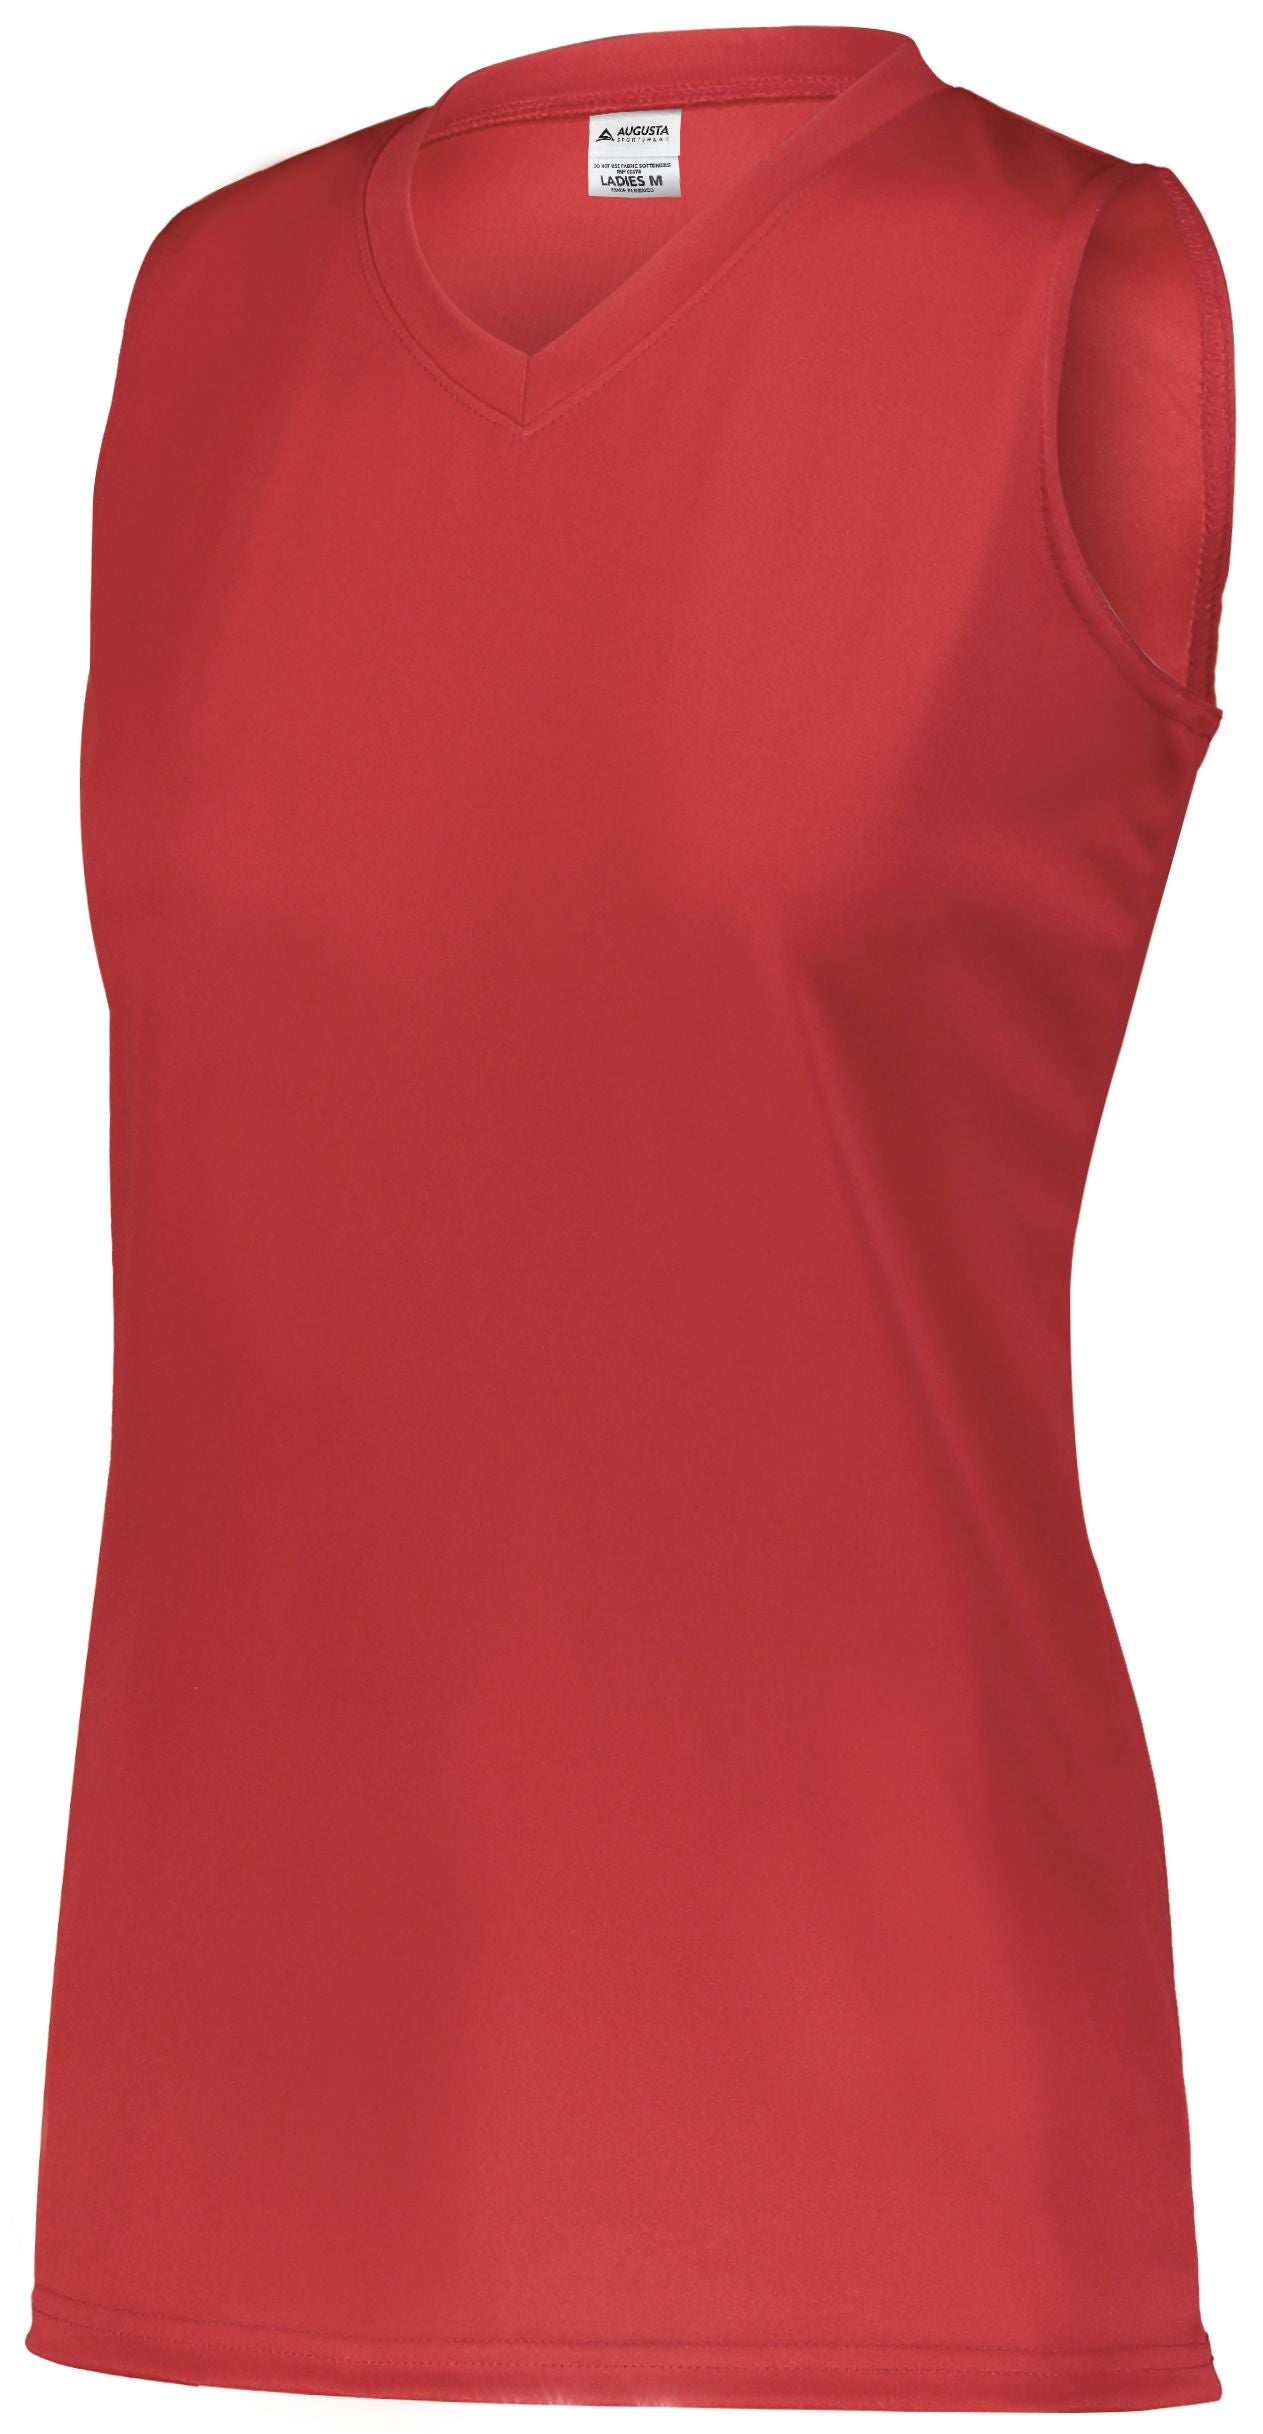 Augusta Sportswear Girls Attain Wicking Sleeveless Jersey in Red  -Part of the Girls, Augusta-Products, Softball, Girls-Jersey, Shirts product lines at KanaleyCreations.com